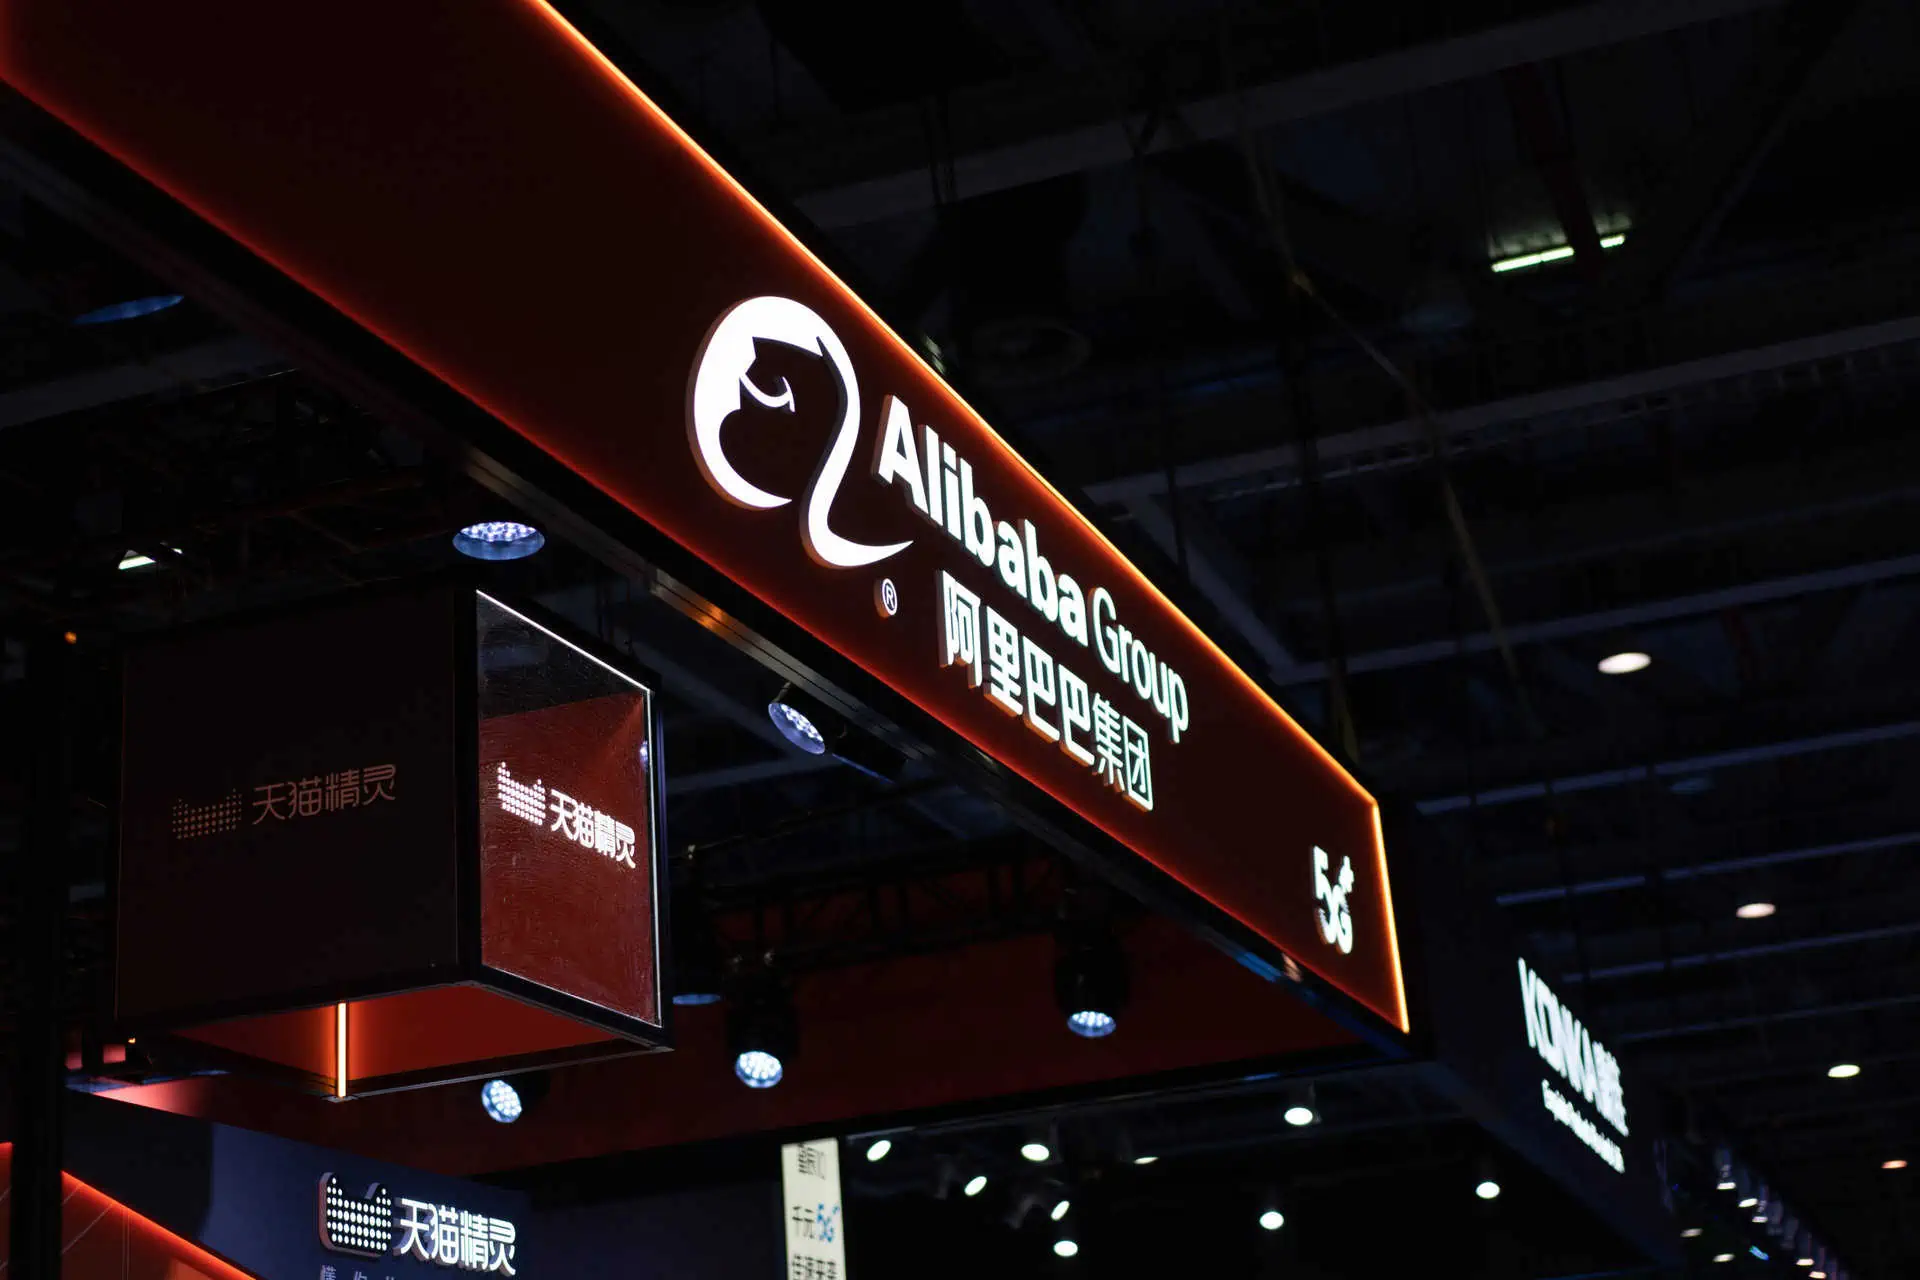 NBH attend at the Alibaba Group summer event in Germany!